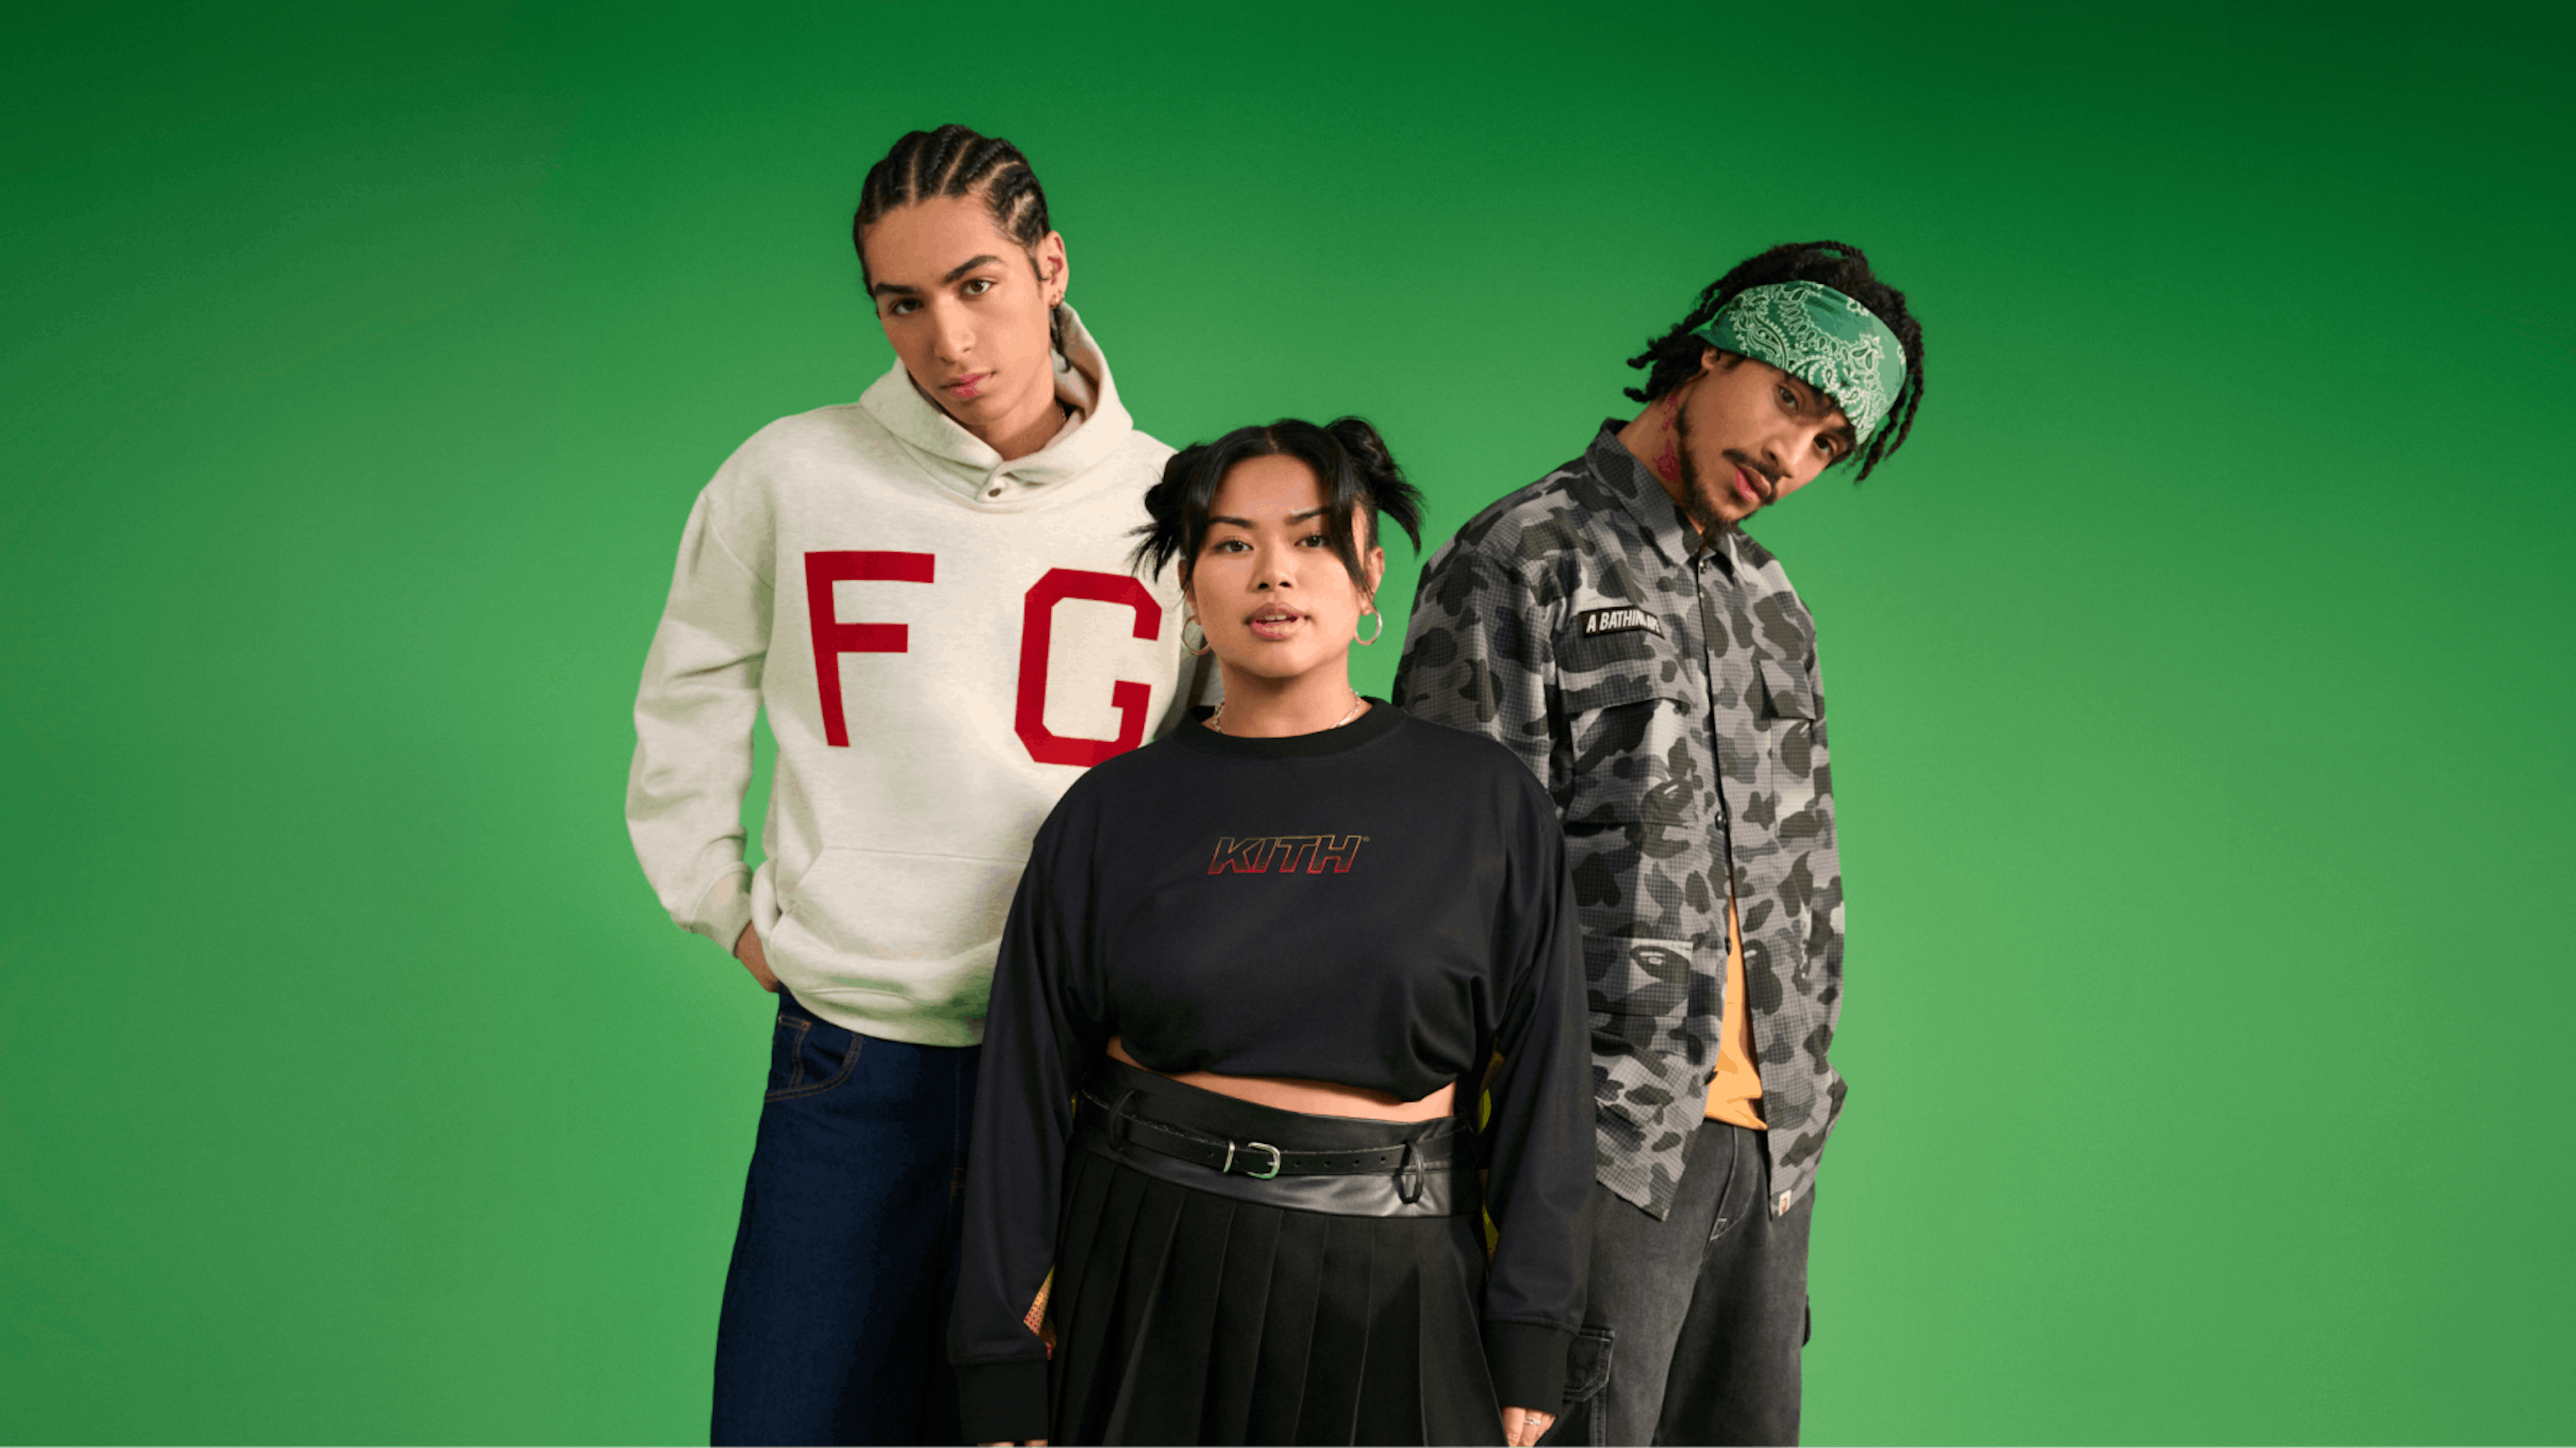 Three stylish young adults pose confidently against a green background. One wears a white hoodie with "F G" and dark jeans, another a black cropped "KITH" sweatshirt with a pleated skirt, and the third a camouflage jacket from A Bathing Ape brand, green bandana, and dark pants. Their styles blend casual and streetwear fashion.